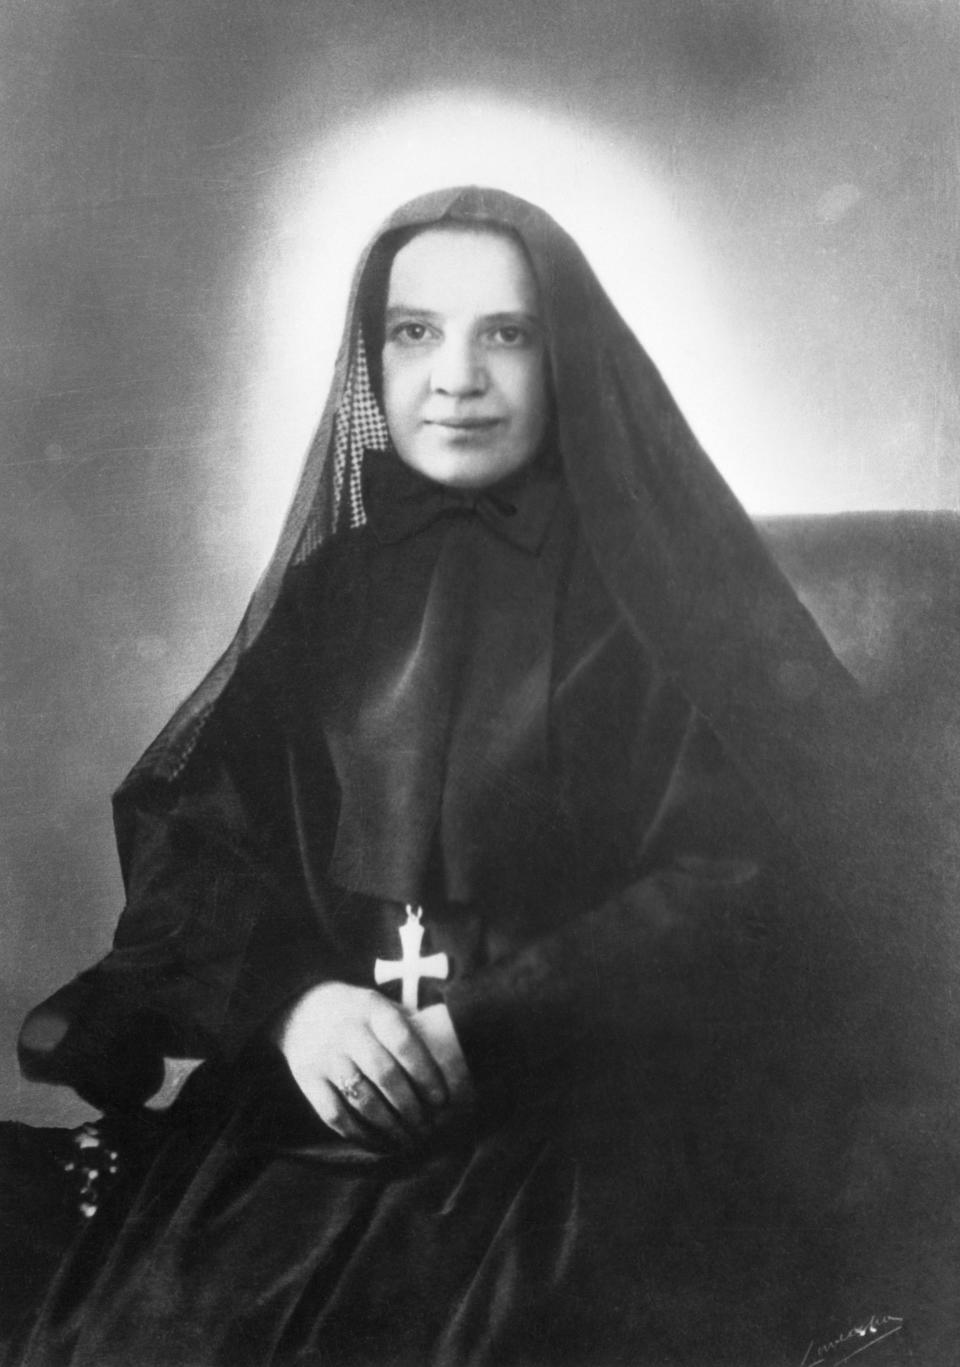 Mother Cabrini (1850-1917), the first American to be canonized, posing in her nun's habit. / Credit: Bettmann/Getty Images